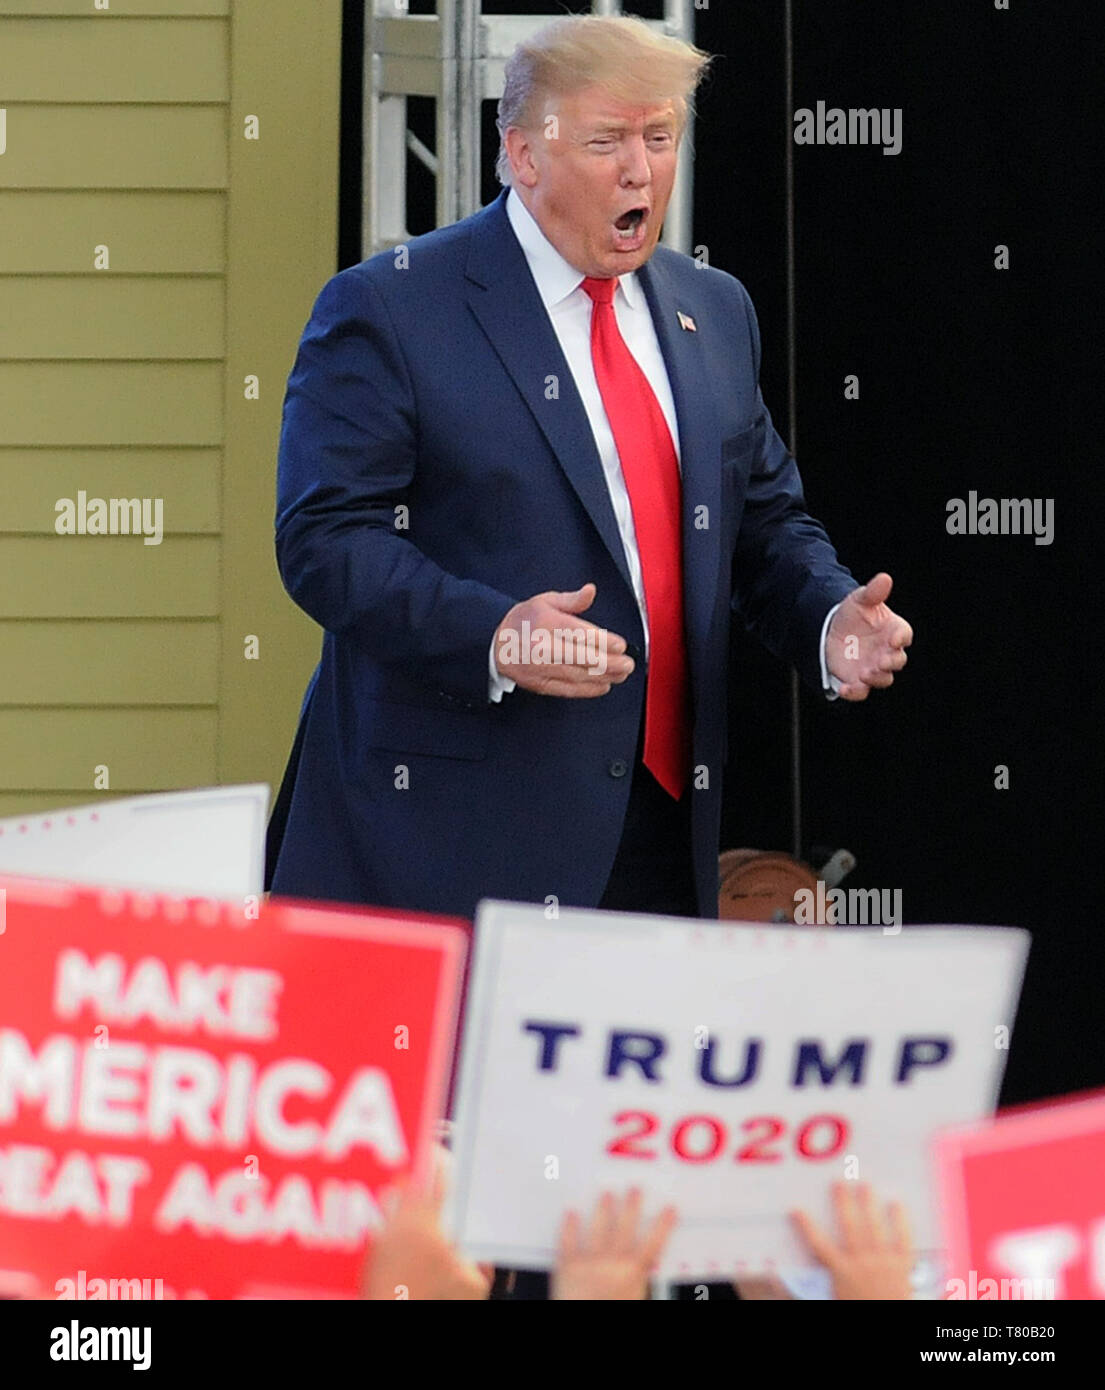 Panama City Beach, Florida, USA. 08th May, 2019. U.S. President Donald Trump reacts as he arrives on stage to address supporters at a Make America Great Again rally at the Aaron Bessant Park  Amphitheater on May 8, 2019 in Panama City Beach, Florida. (Paul Hennessy/Alamy) Credit: Paul Hennessy/Alamy Live News Stock Photo